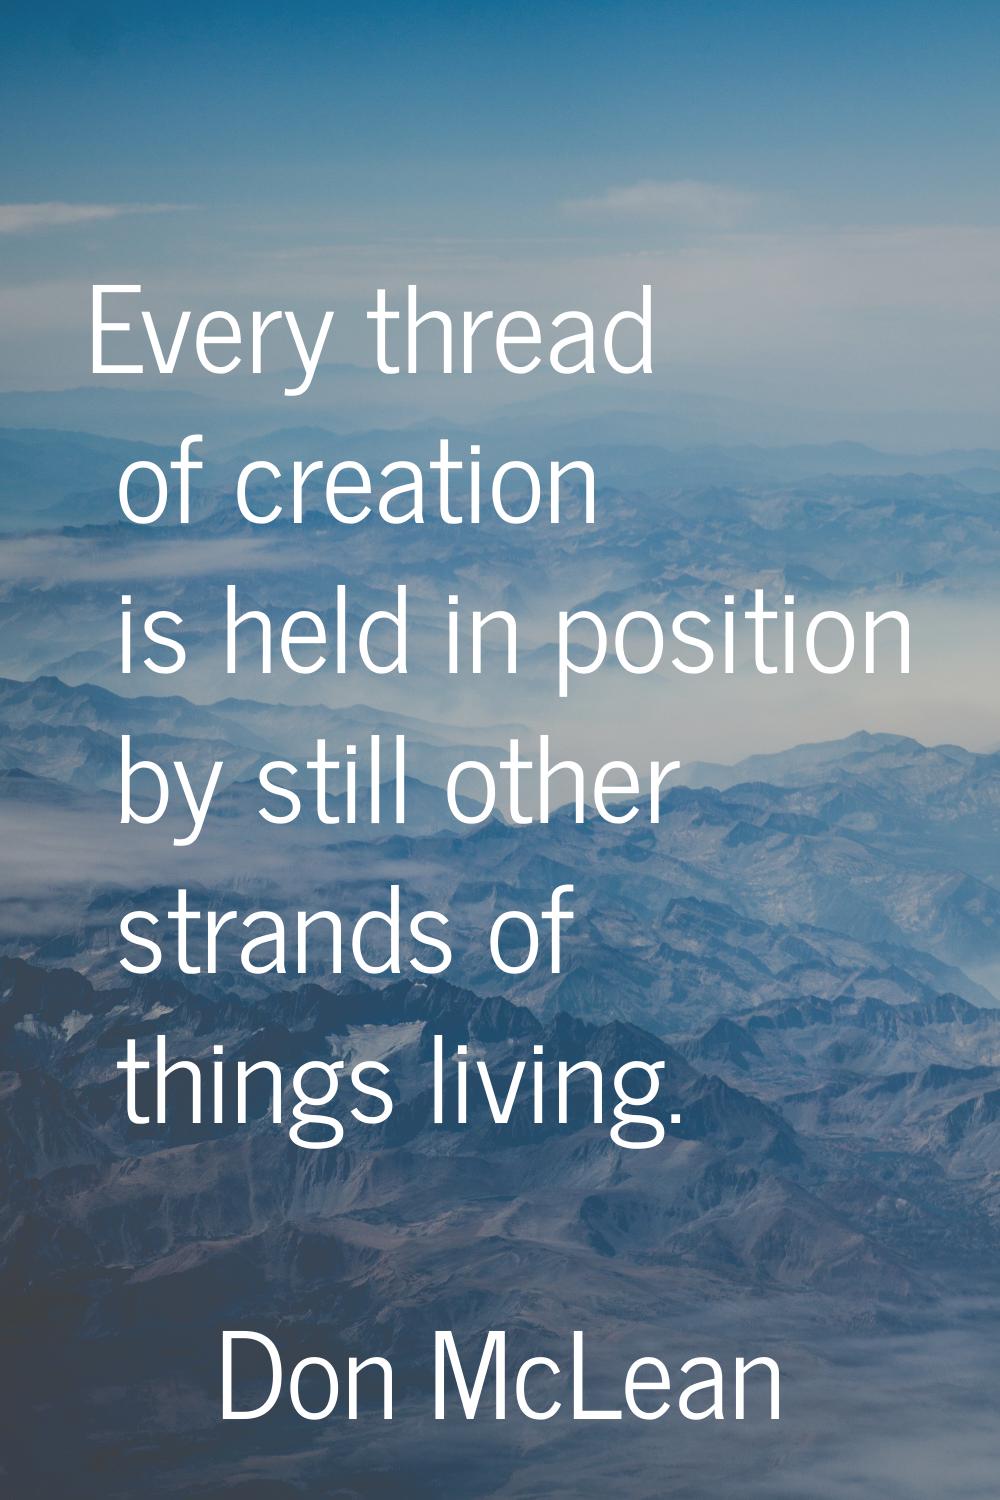 Every thread of creation is held in position by still other strands of things living.